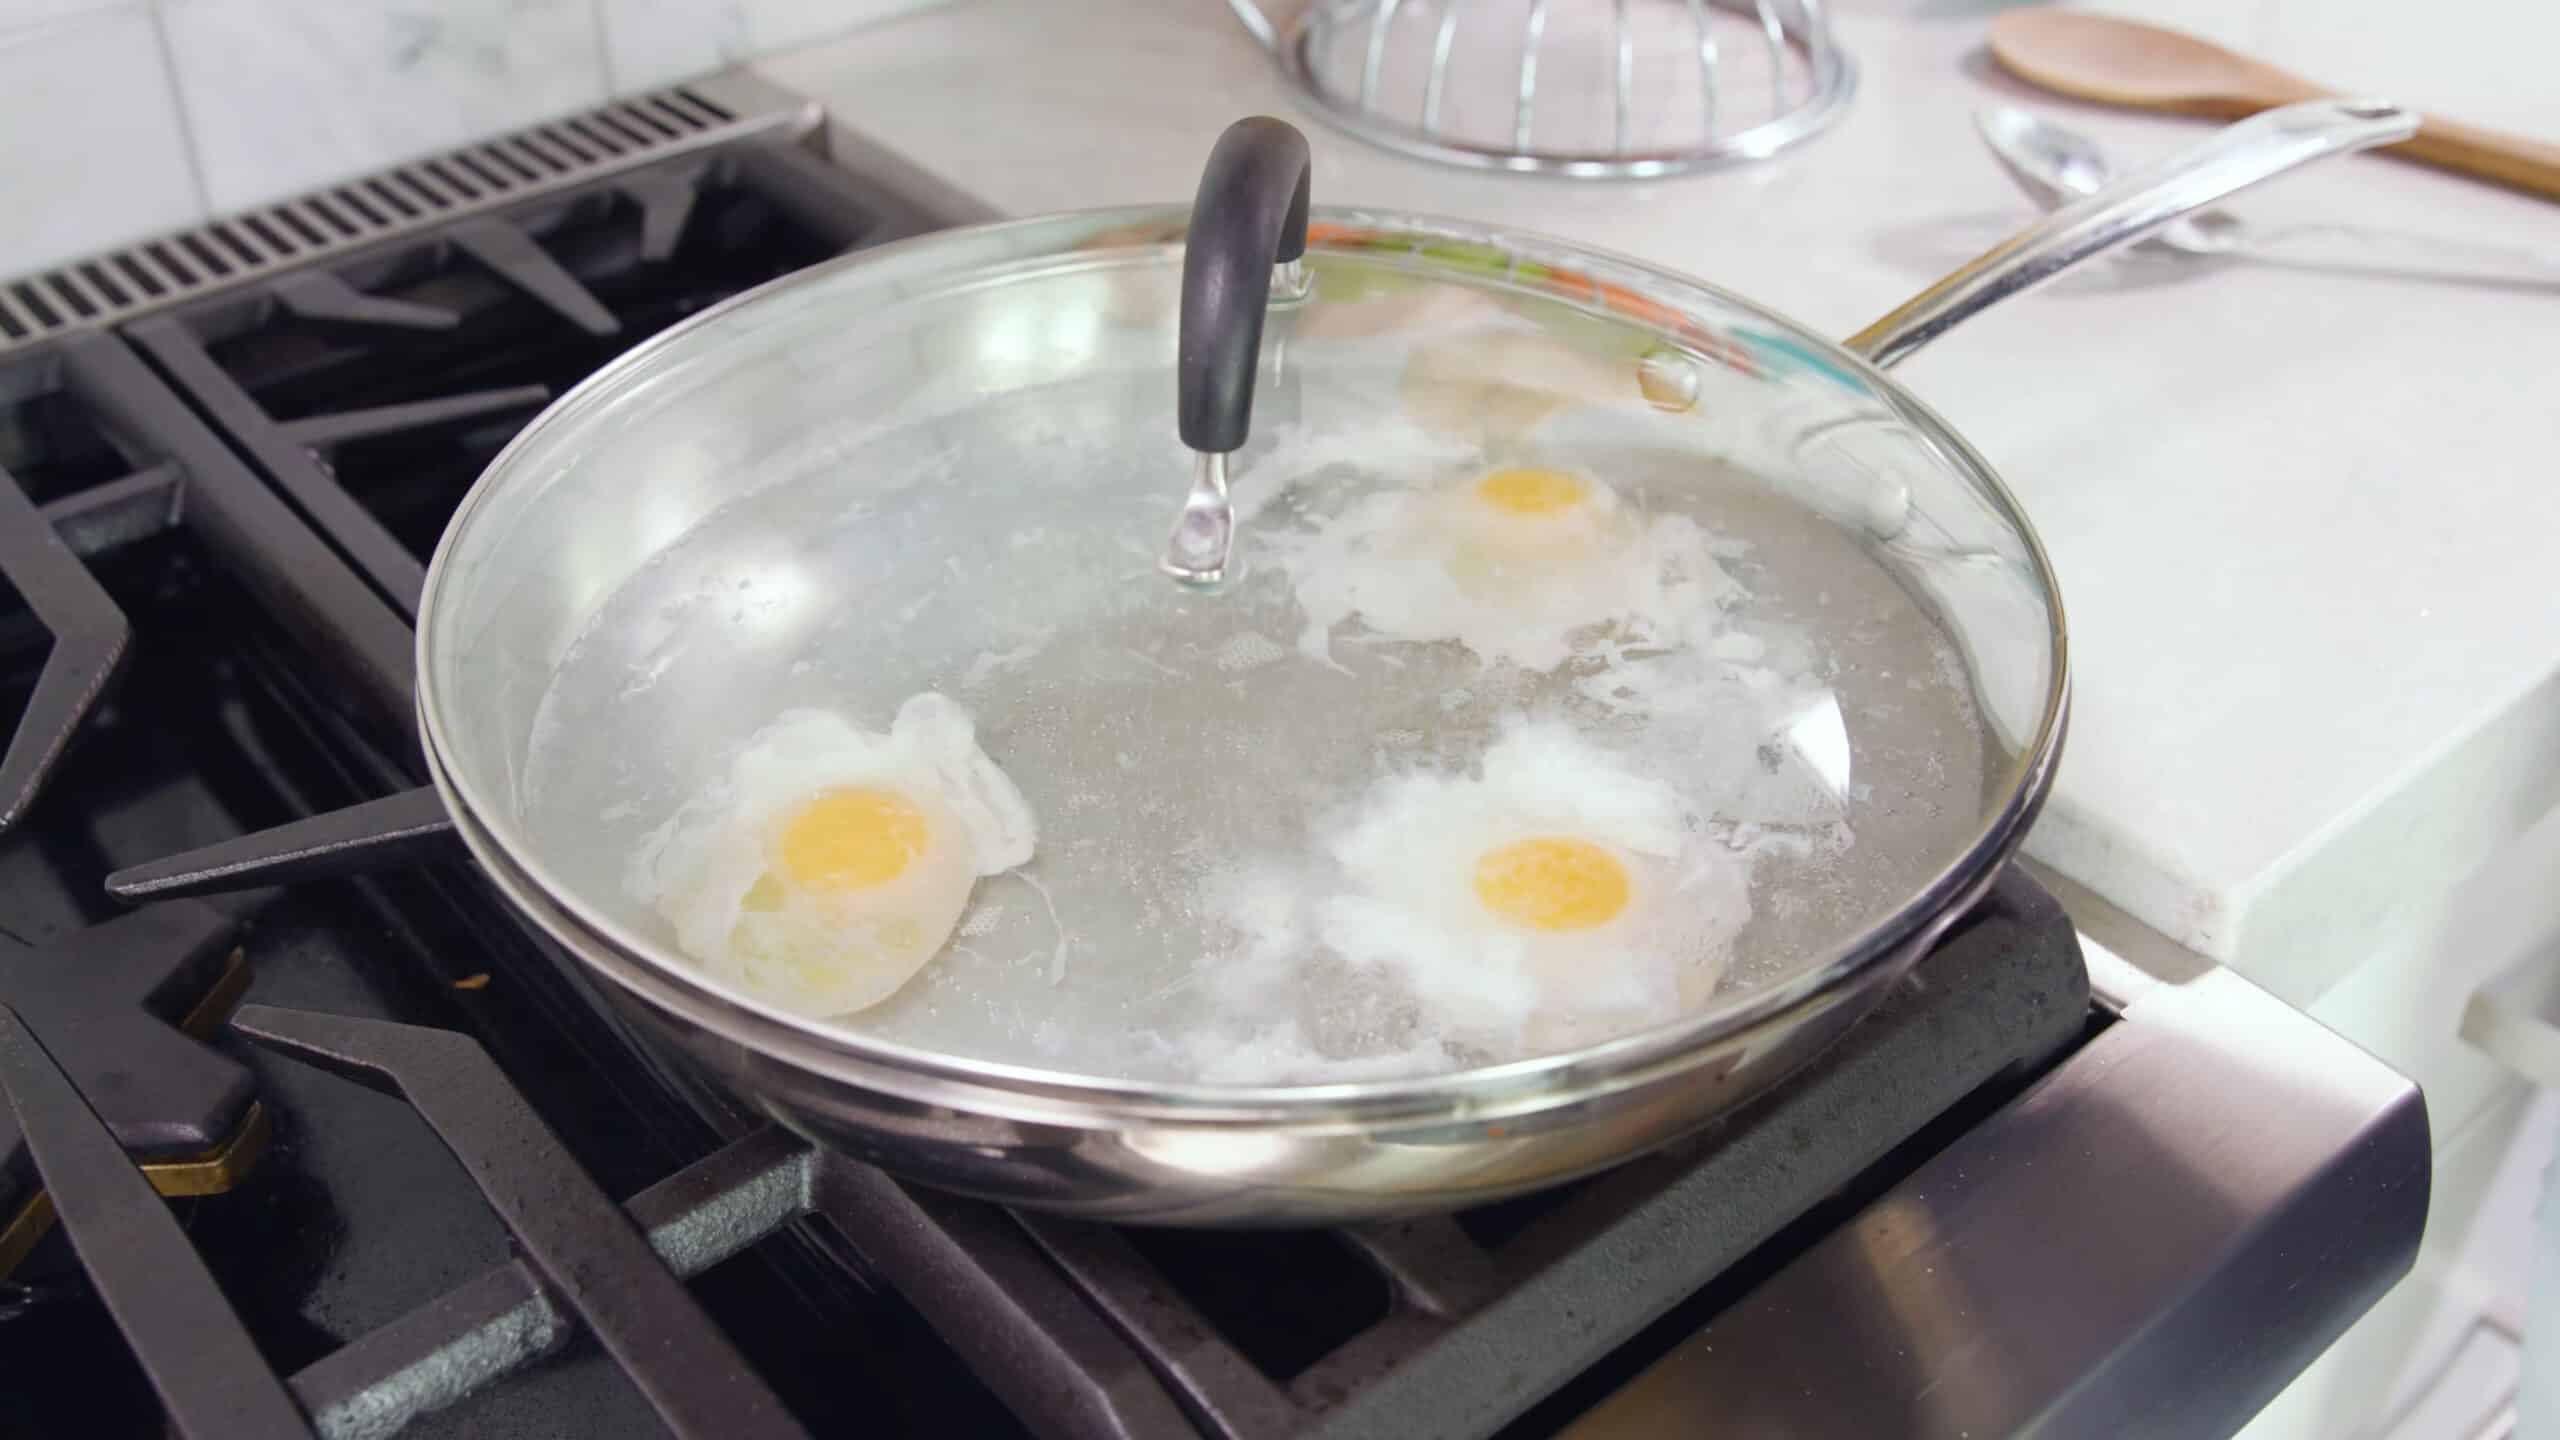 Angled view of silver saucepan with glass lid and three eggs being poached inside on stovetop.